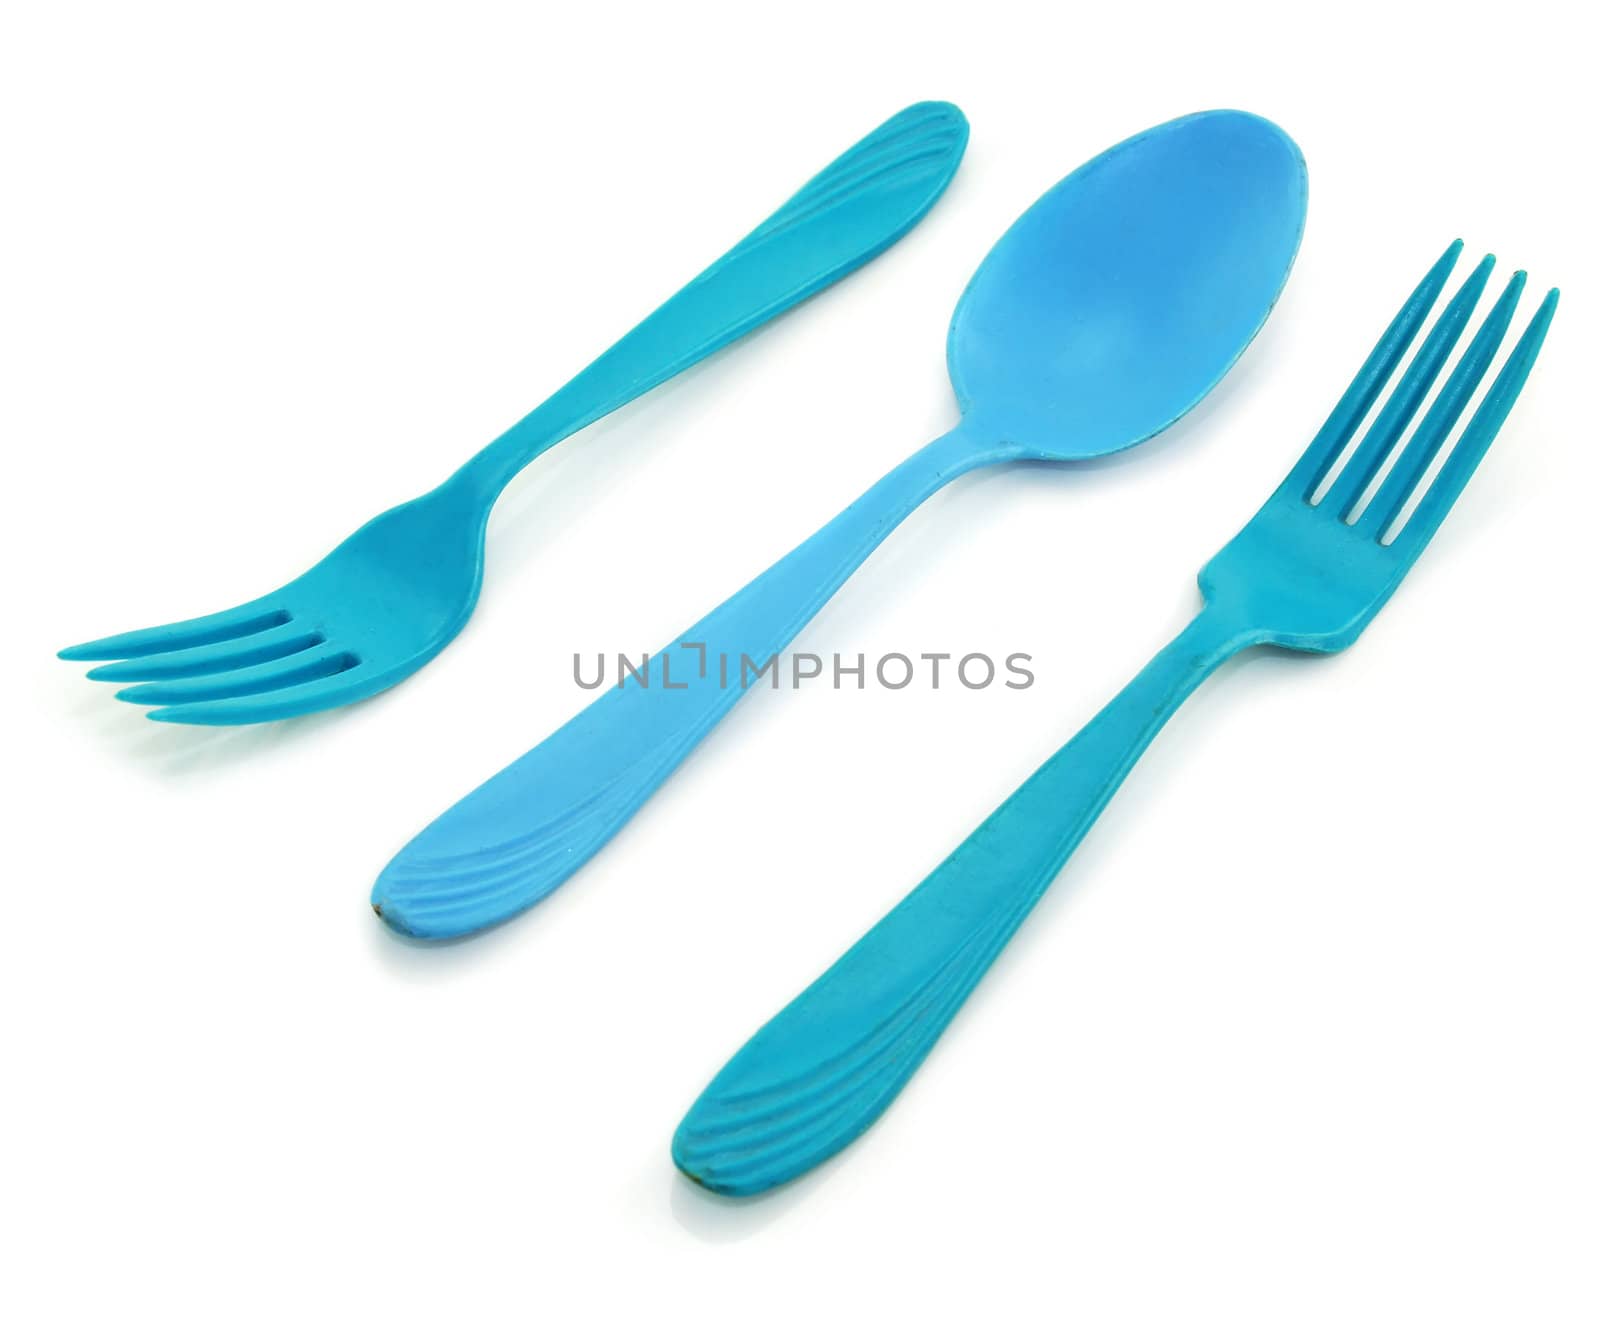 Two blue forkes and spoon isolated on a white background